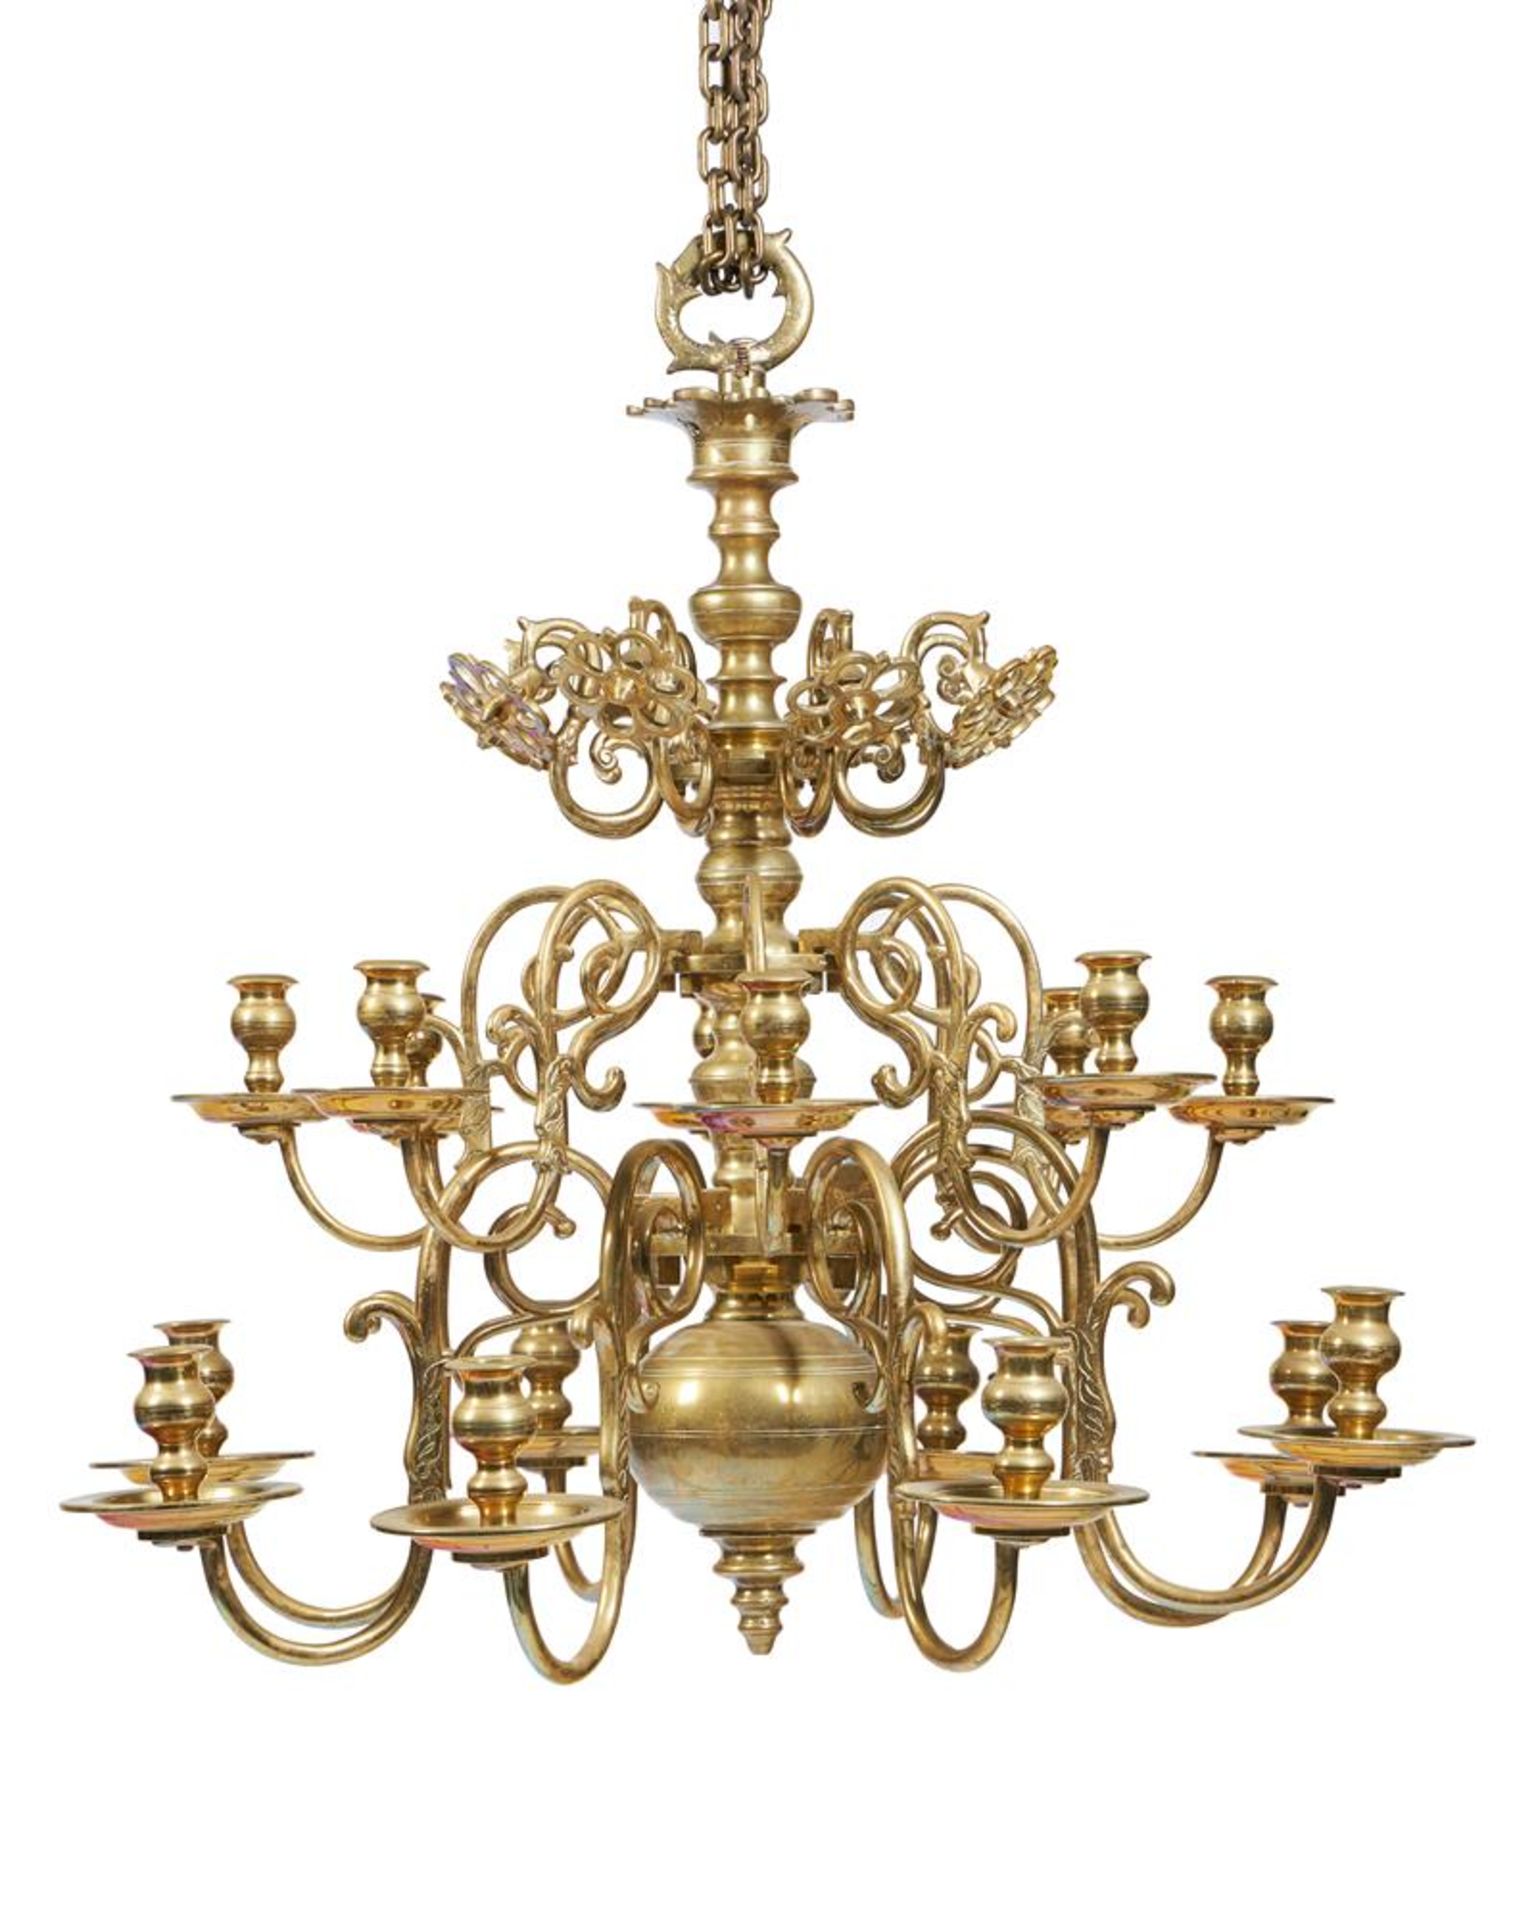 AN ANGLO-DUTCH GILT BRASS SIXTEEN LIGHT CHANDELIER, 18TH/19TH CENTURY - Image 4 of 4